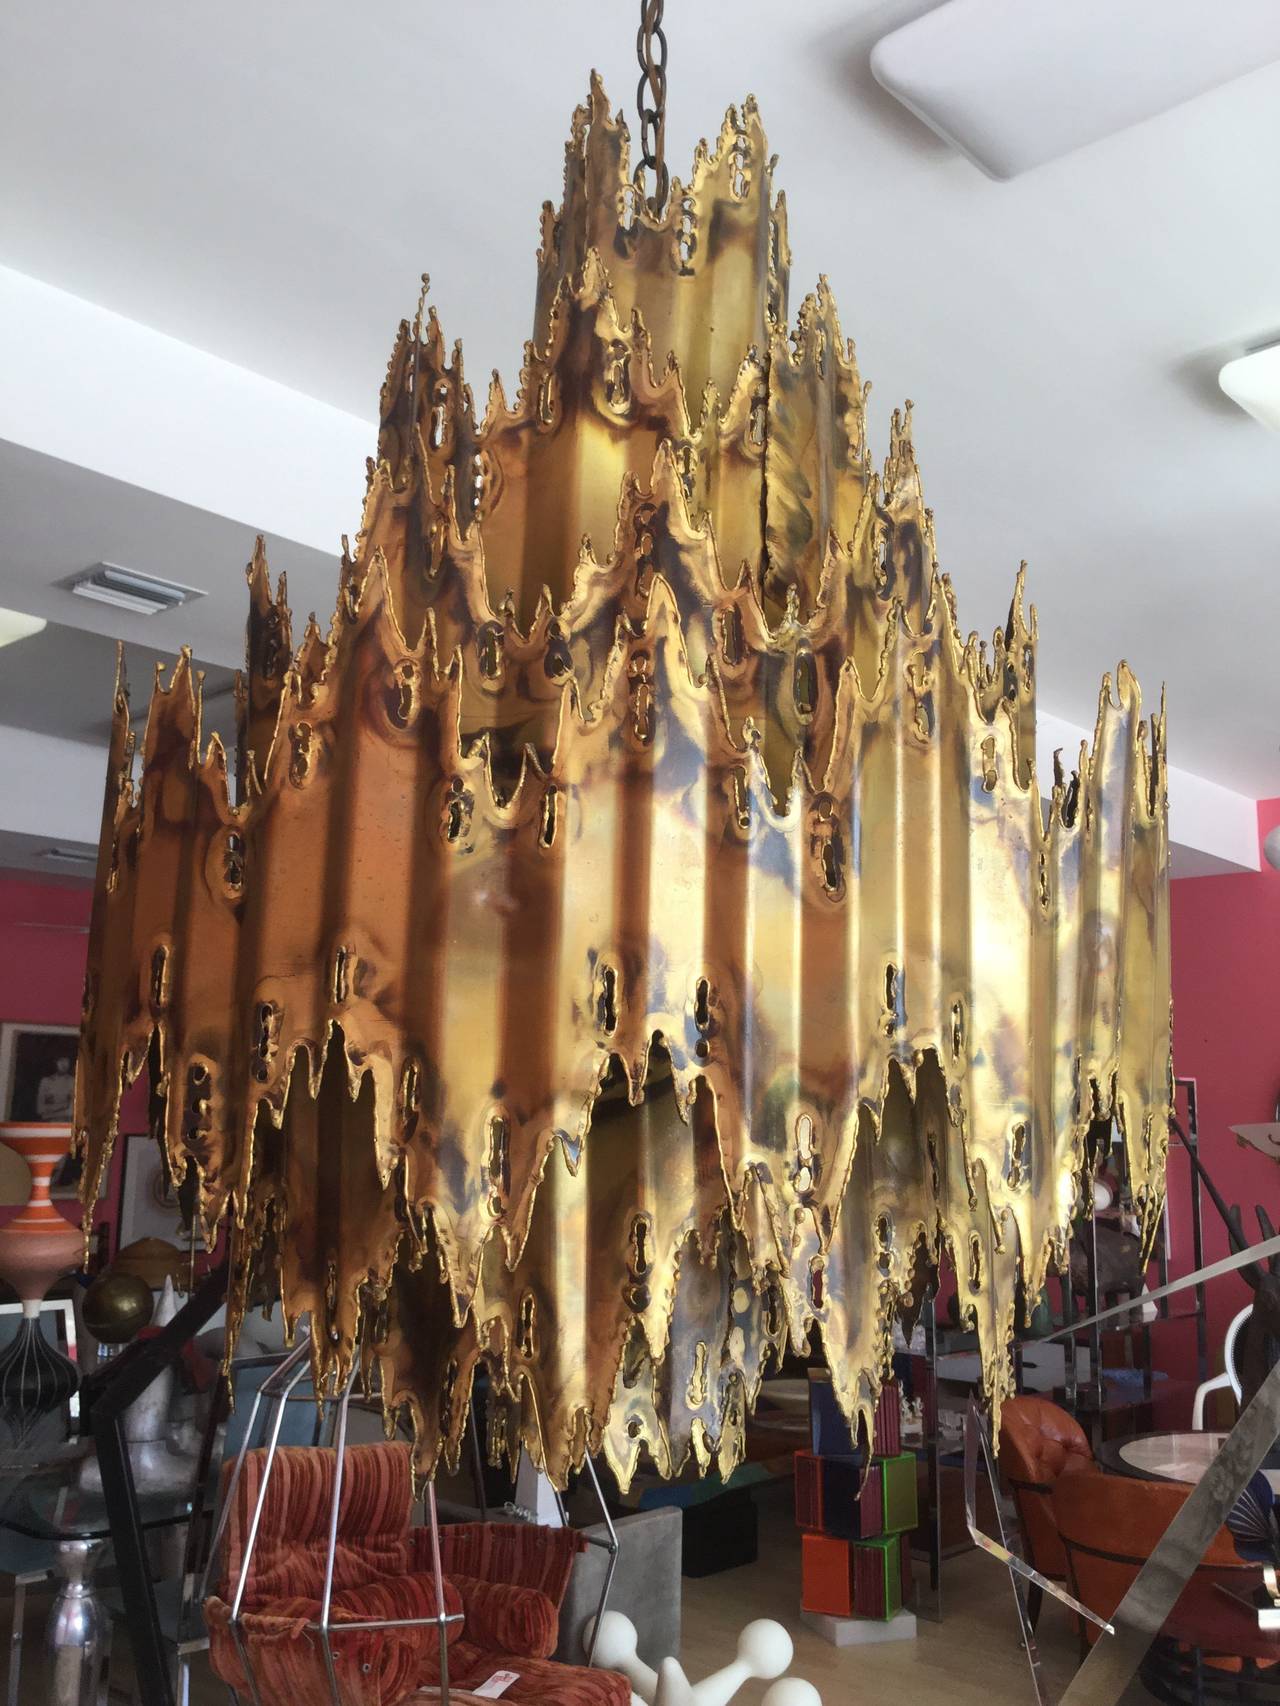 This is a great chandelier measuring 32